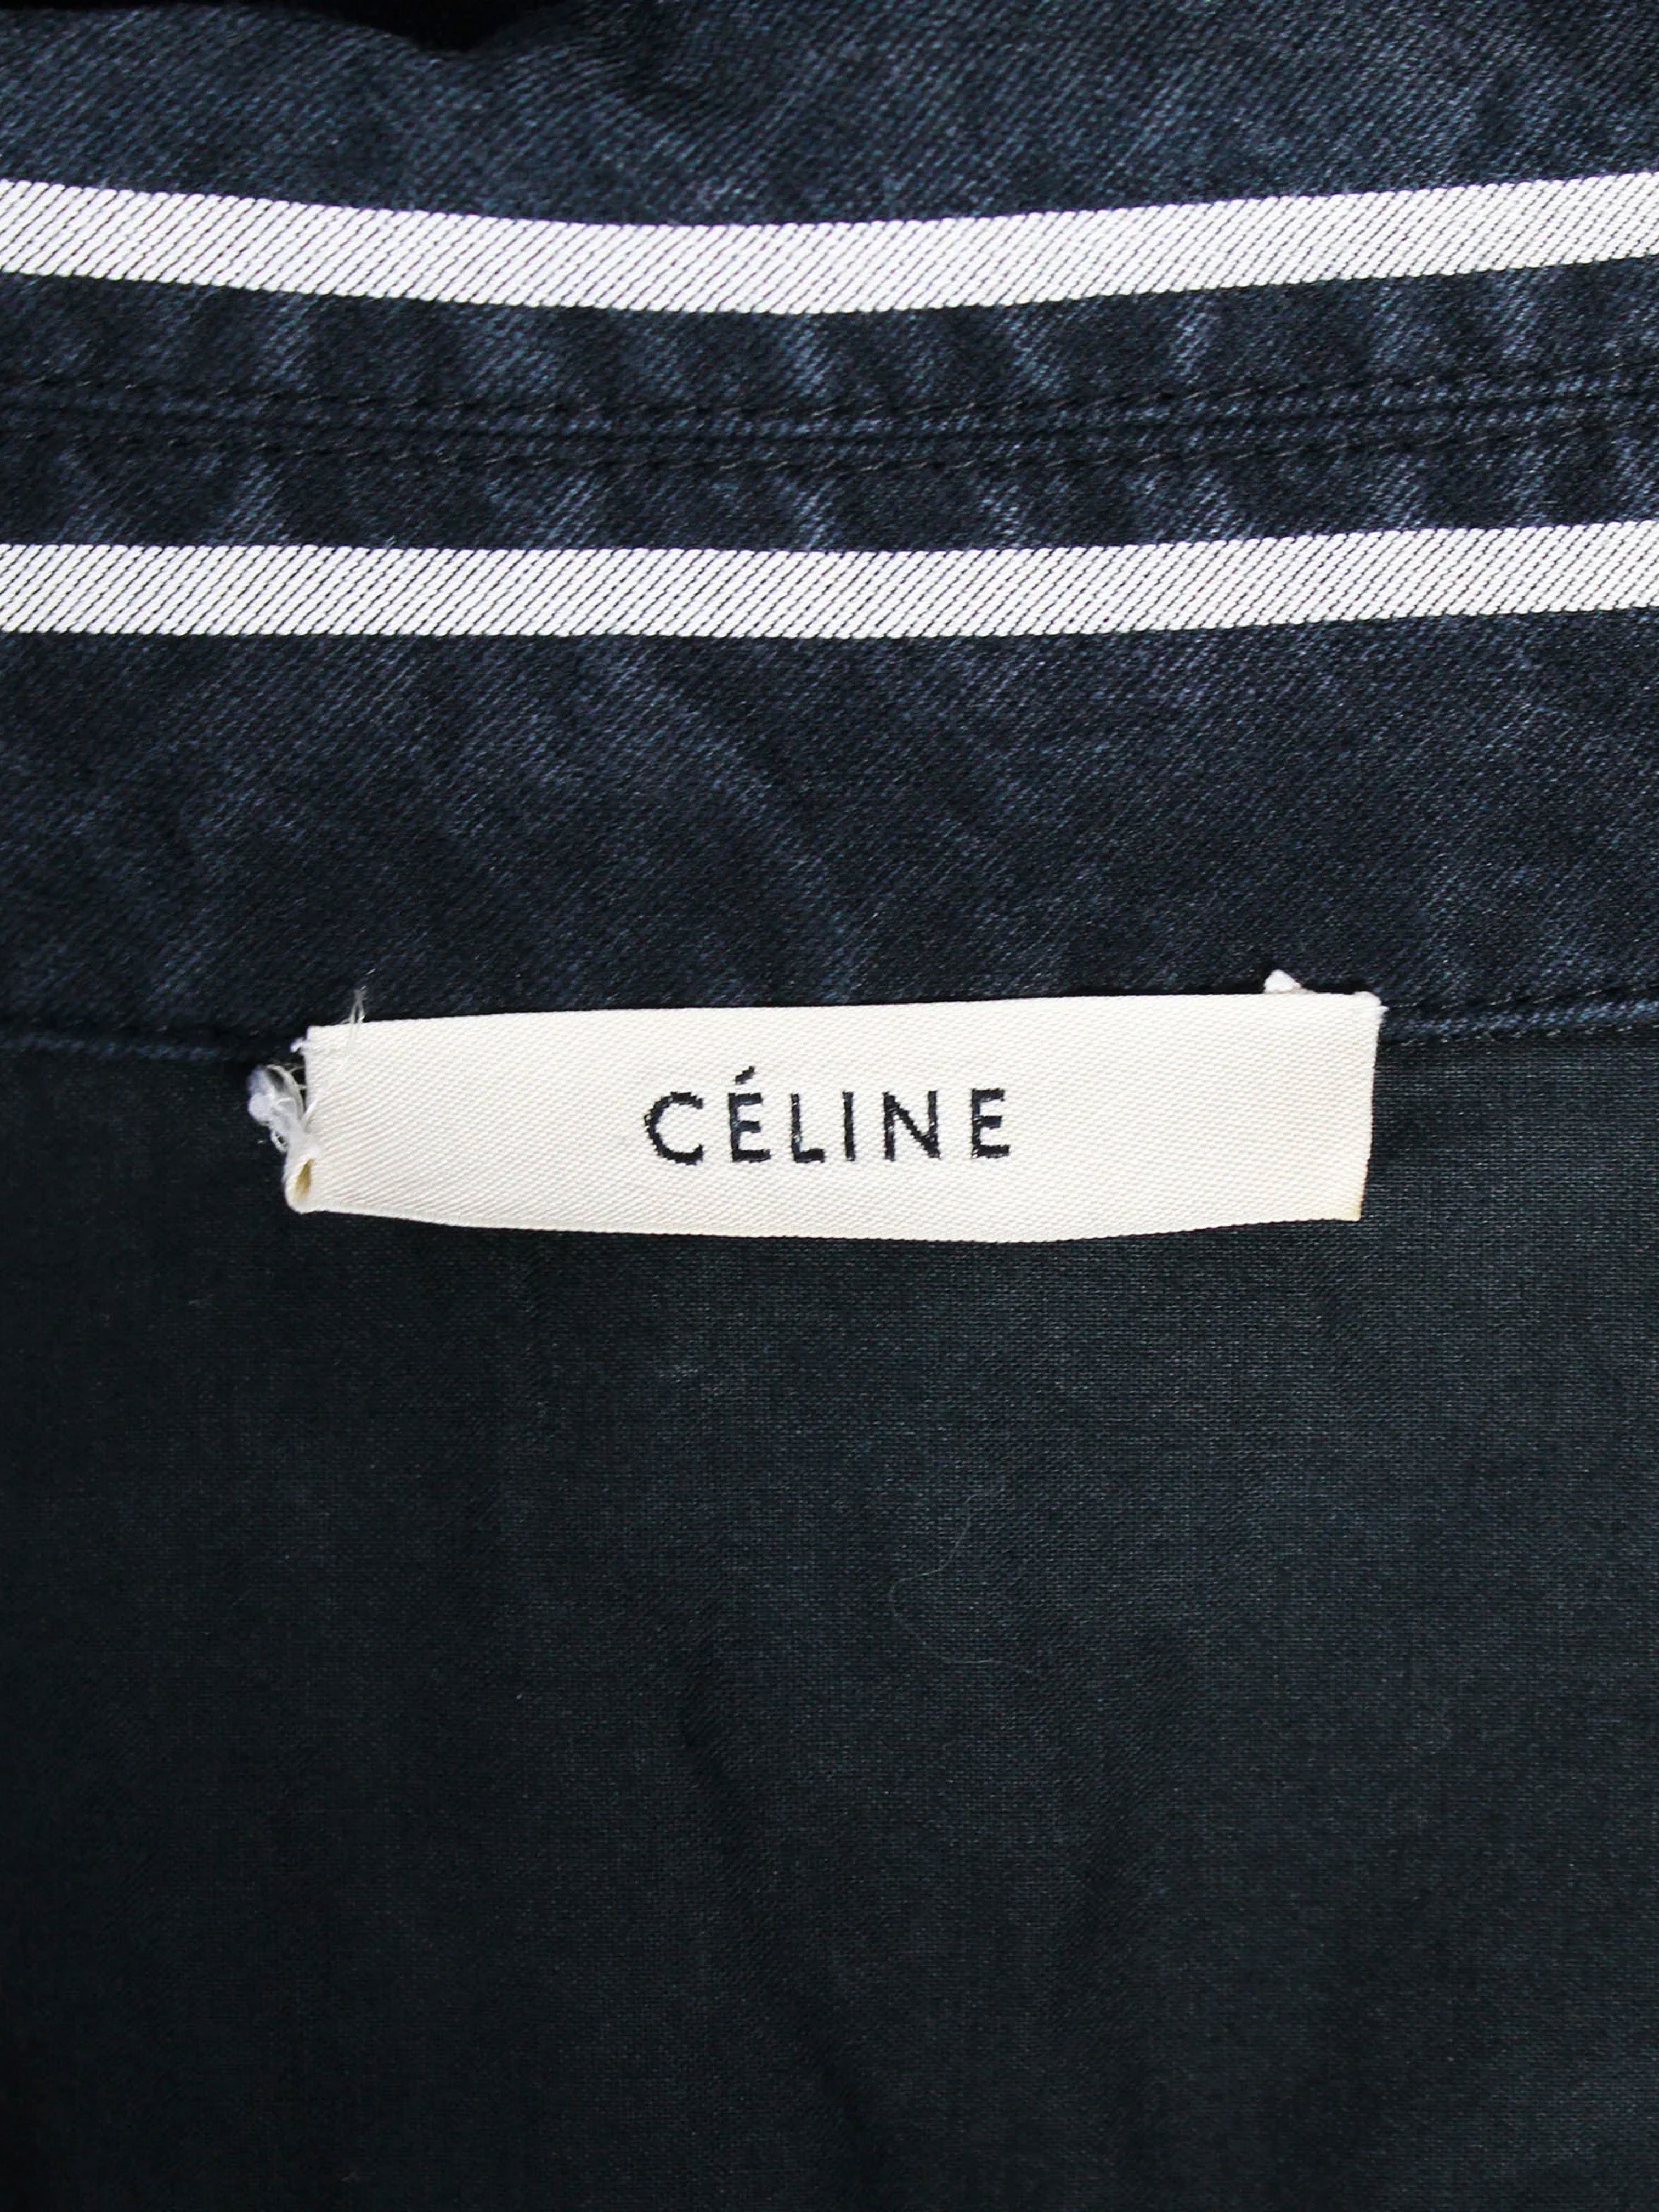 Céline by Phoebe Philo SS 2018 Navy Striped Top · INTO